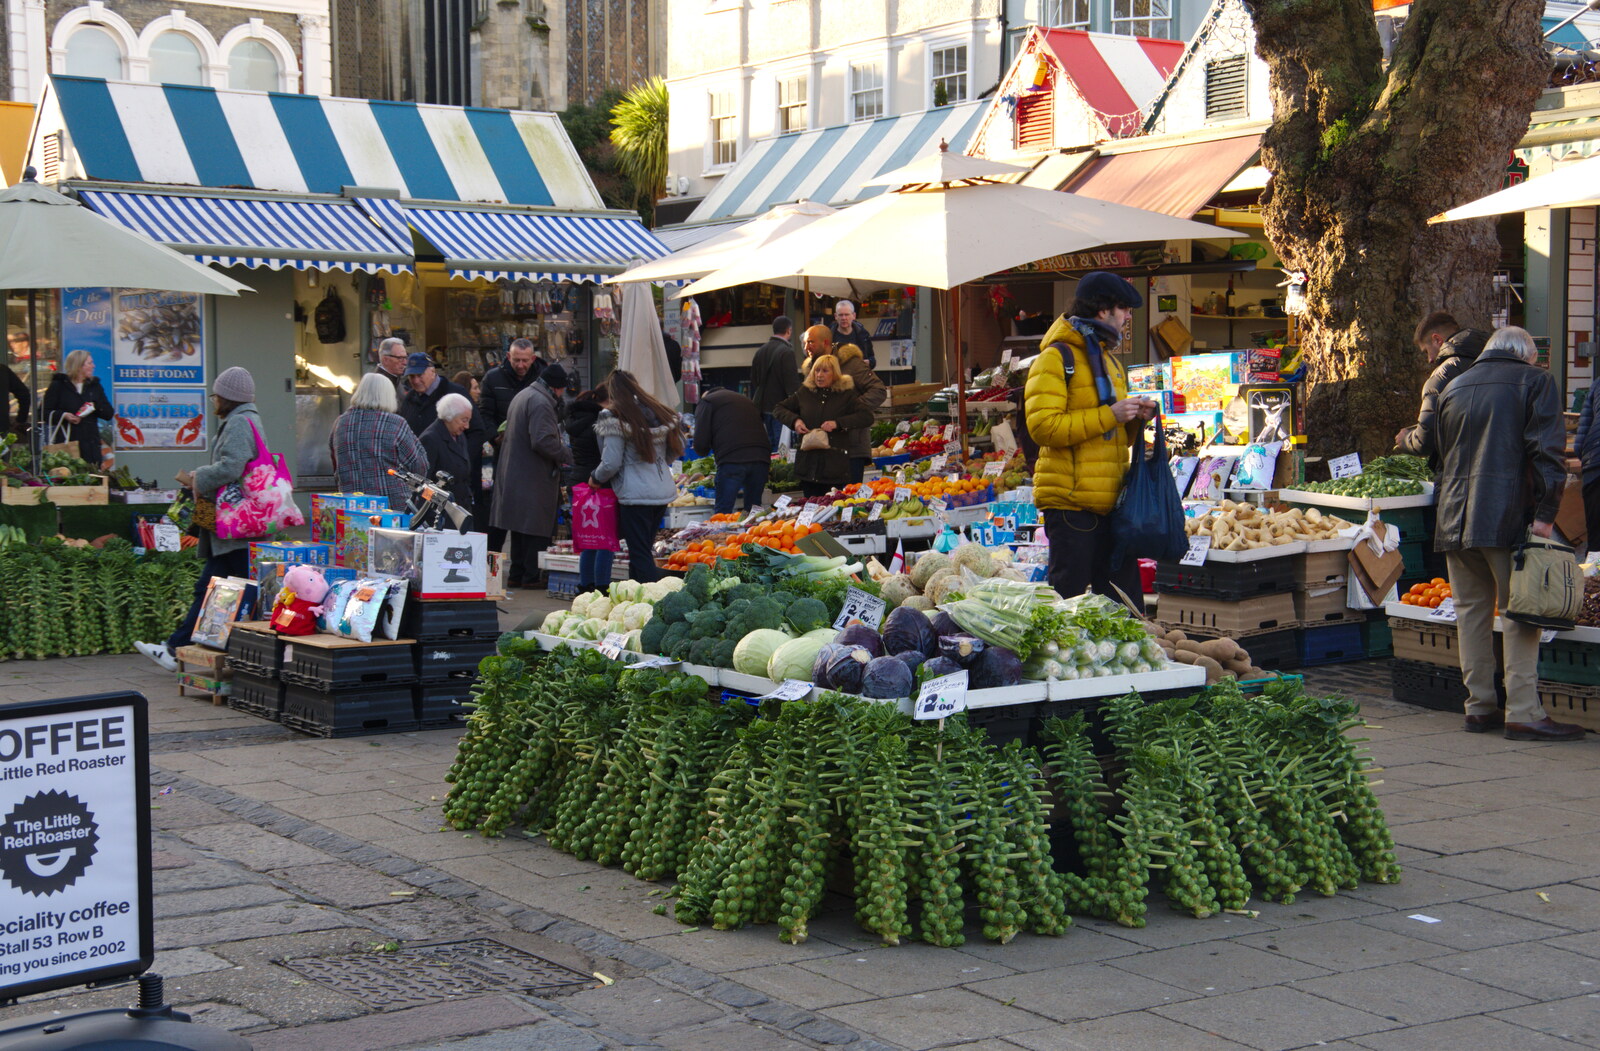 A massive pile of sprouts-on-a-stick from A Spot of Christmas Shopping, Norwich, Norfolk - 23rd December 2019